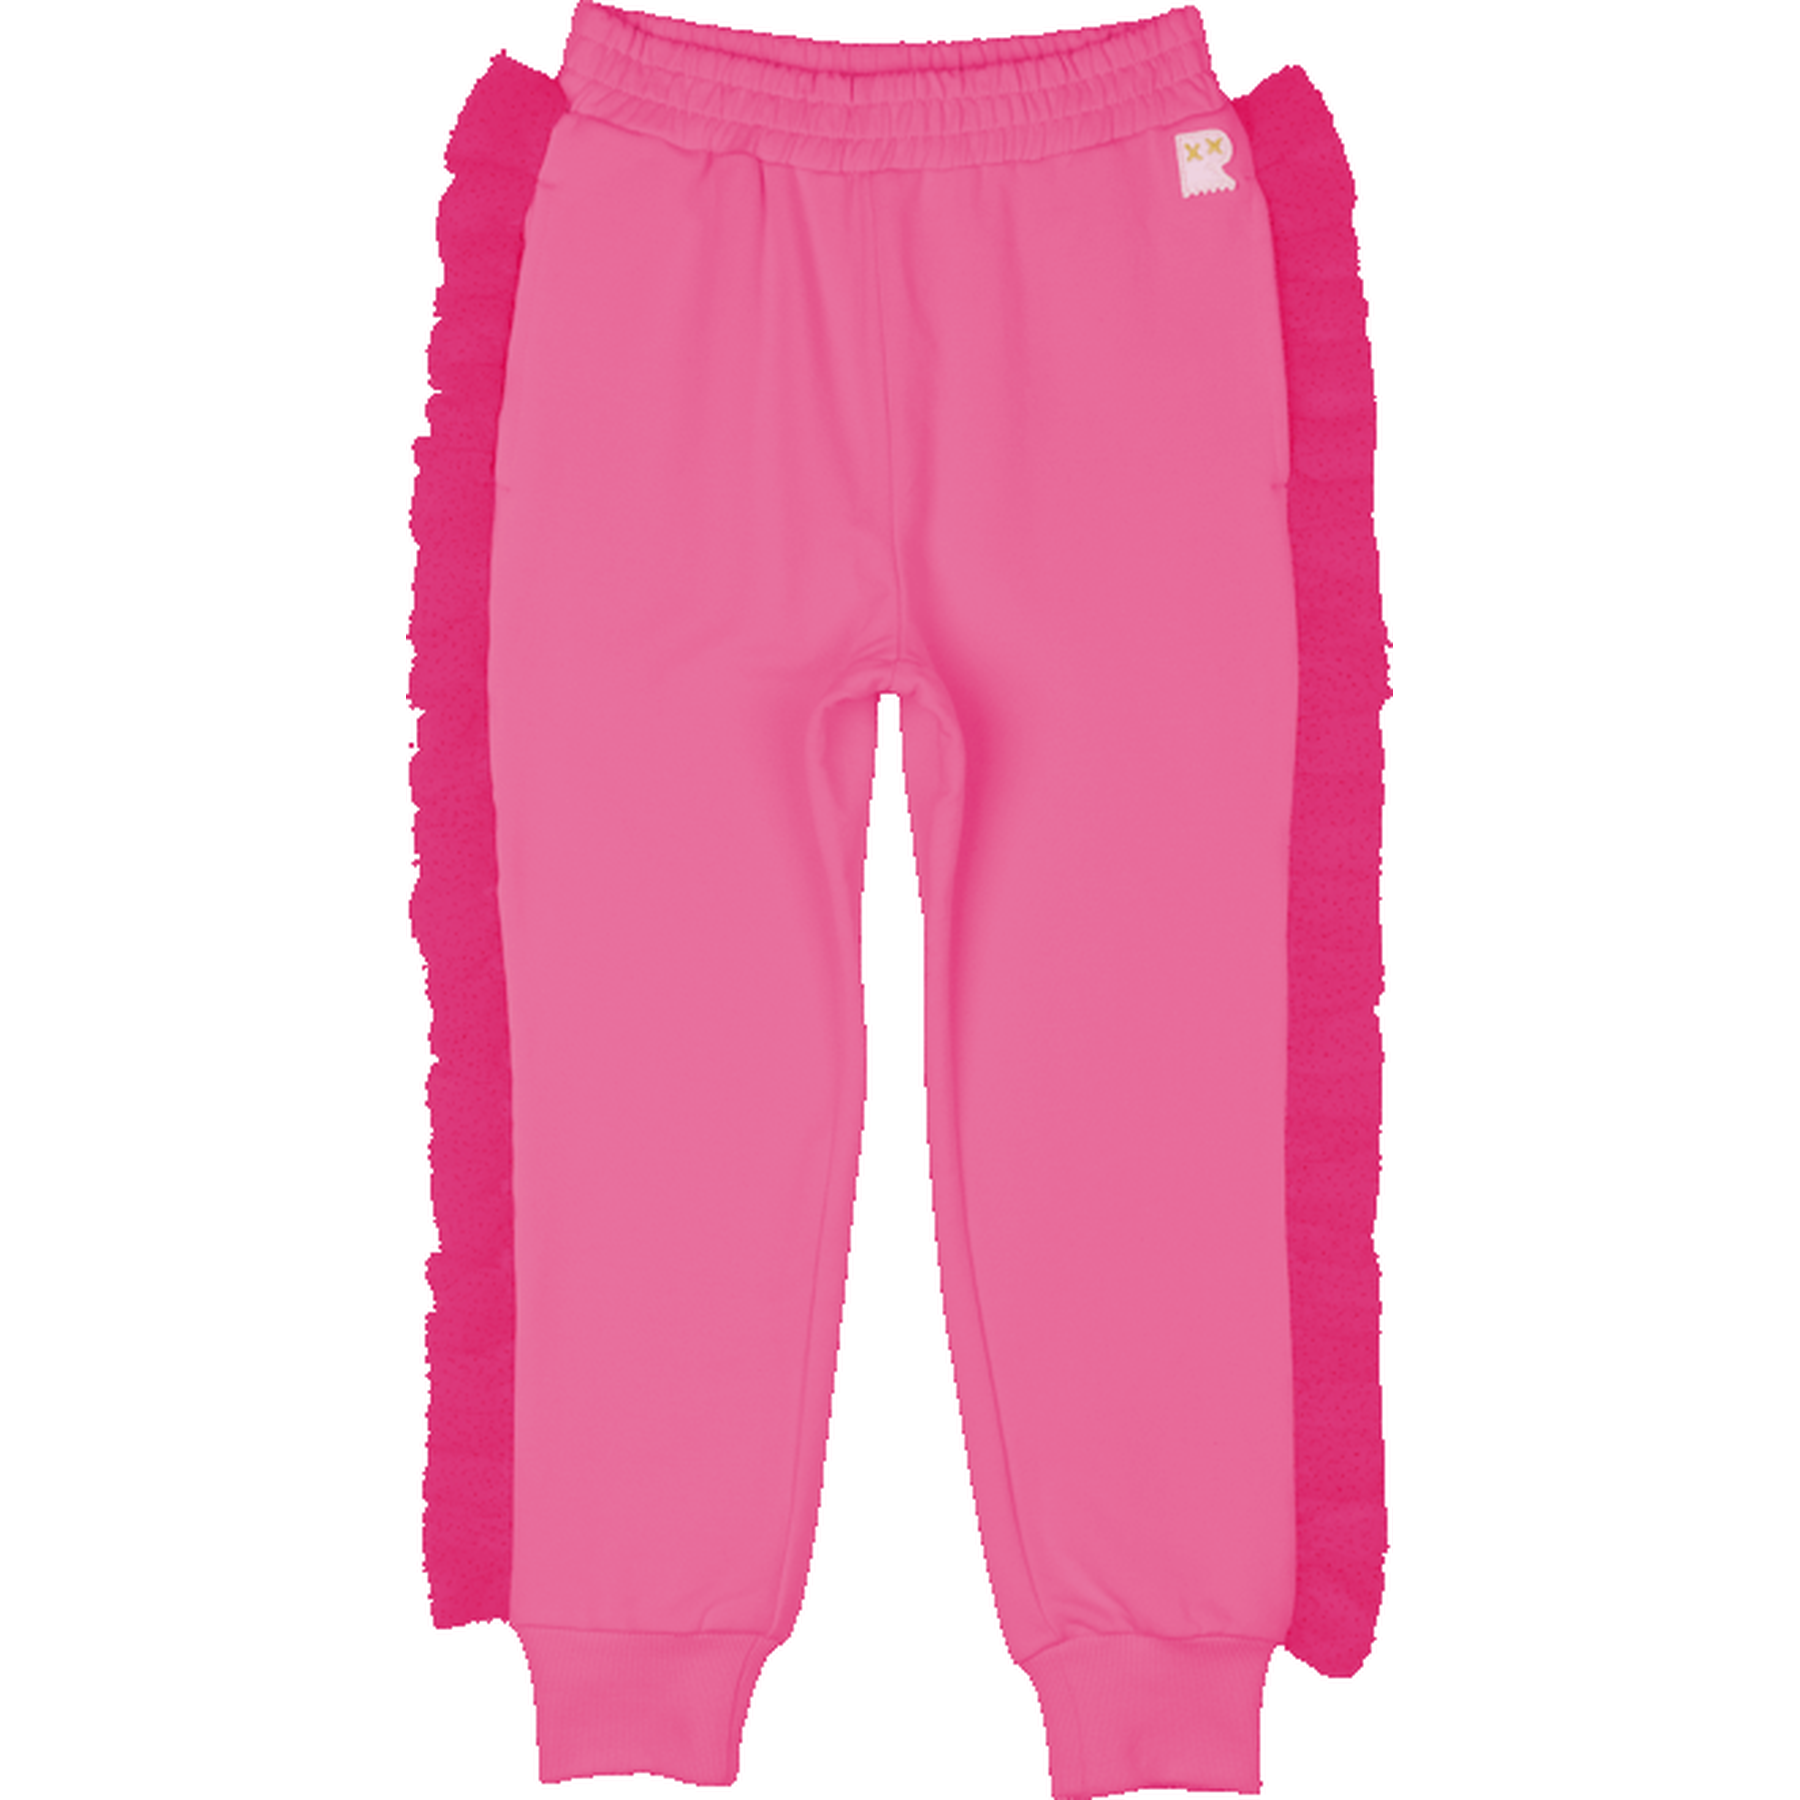 Allen Solly Pink Jogger Pants : Amazon.in: Clothing & Accessories